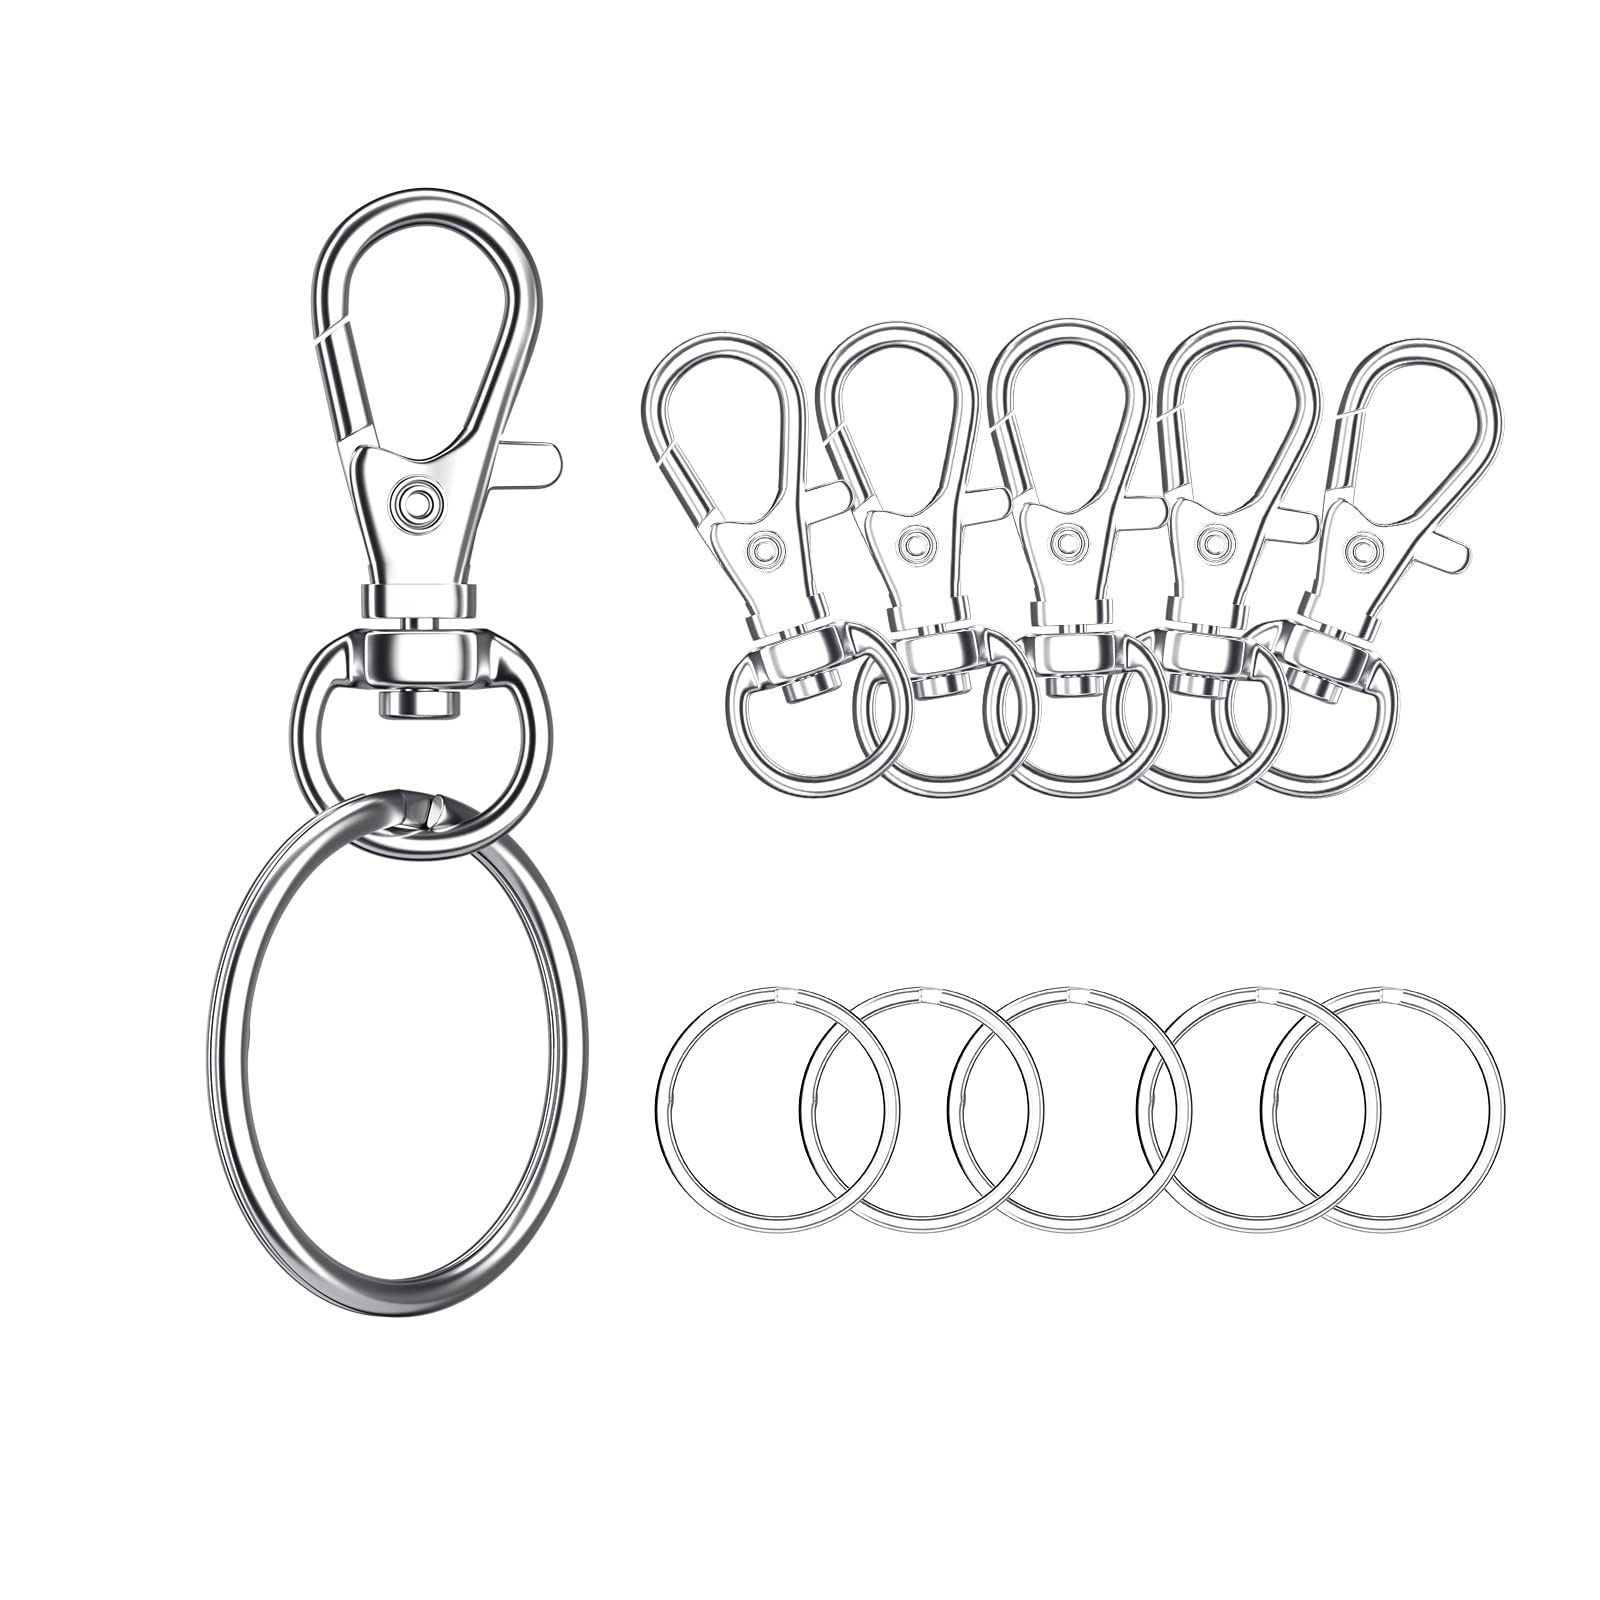 20pcs Keychain Clips for DIY Crafts, Swivel Snap Hooks with Key